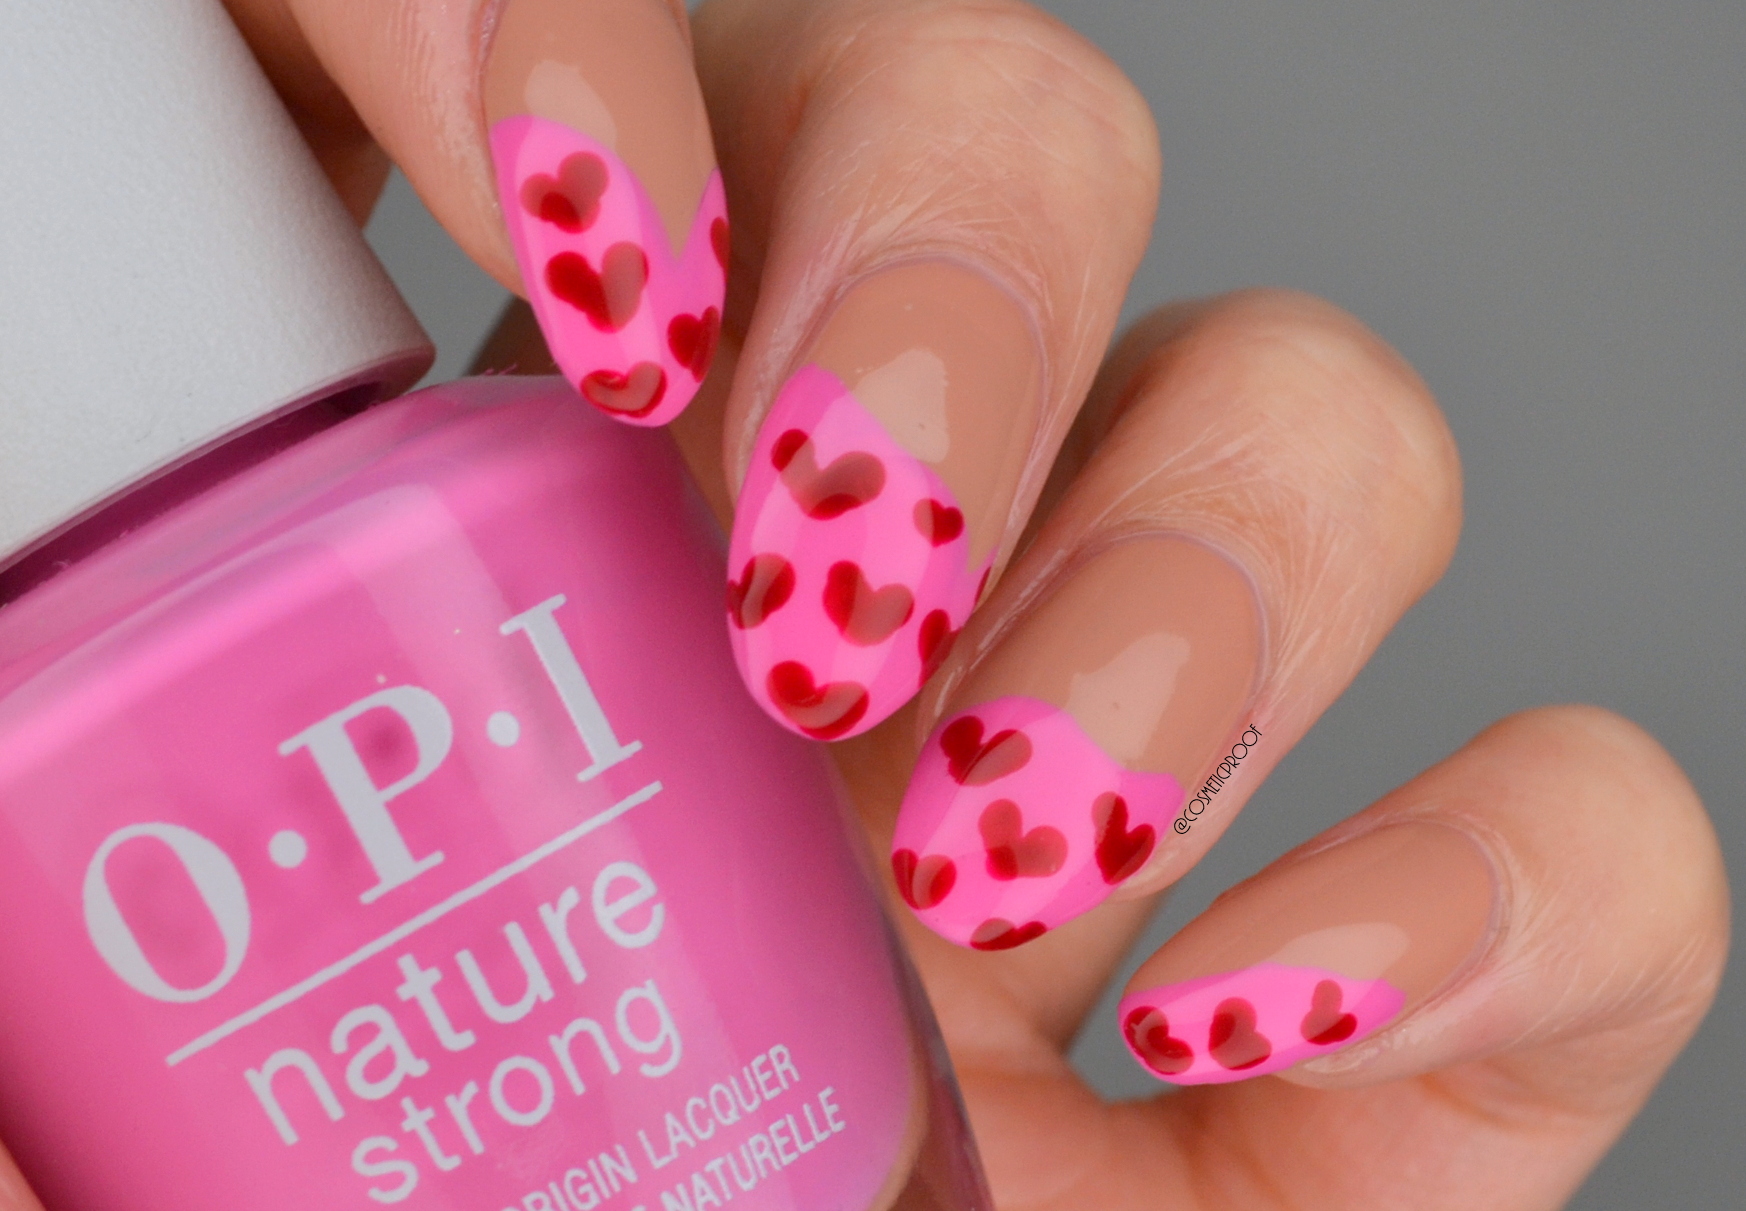 1. Pink and White Heart Nail Art Tutorial - wide 7